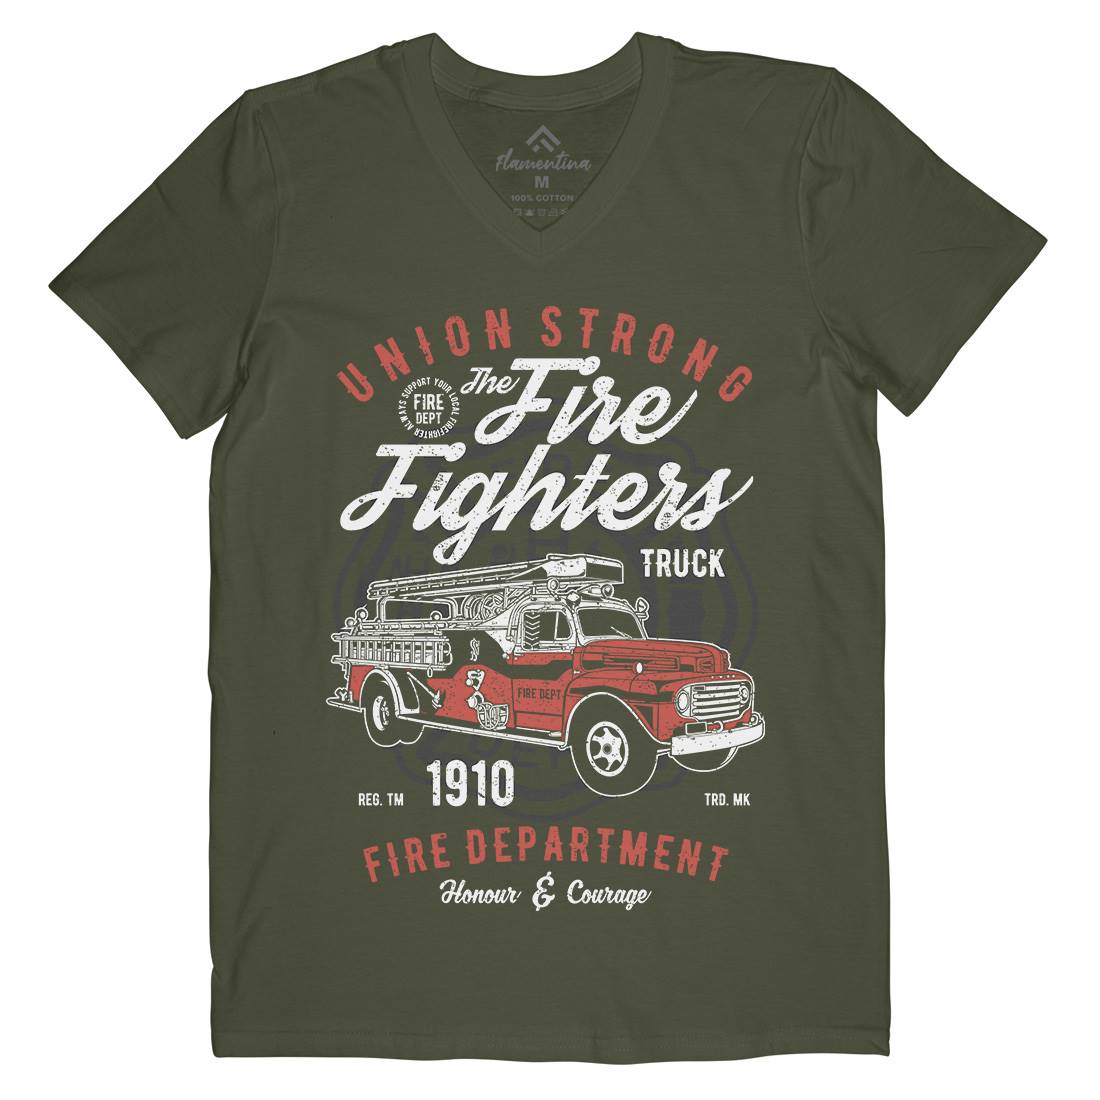 Union Strong Mens Organic V-Neck T-Shirt Firefighters A781